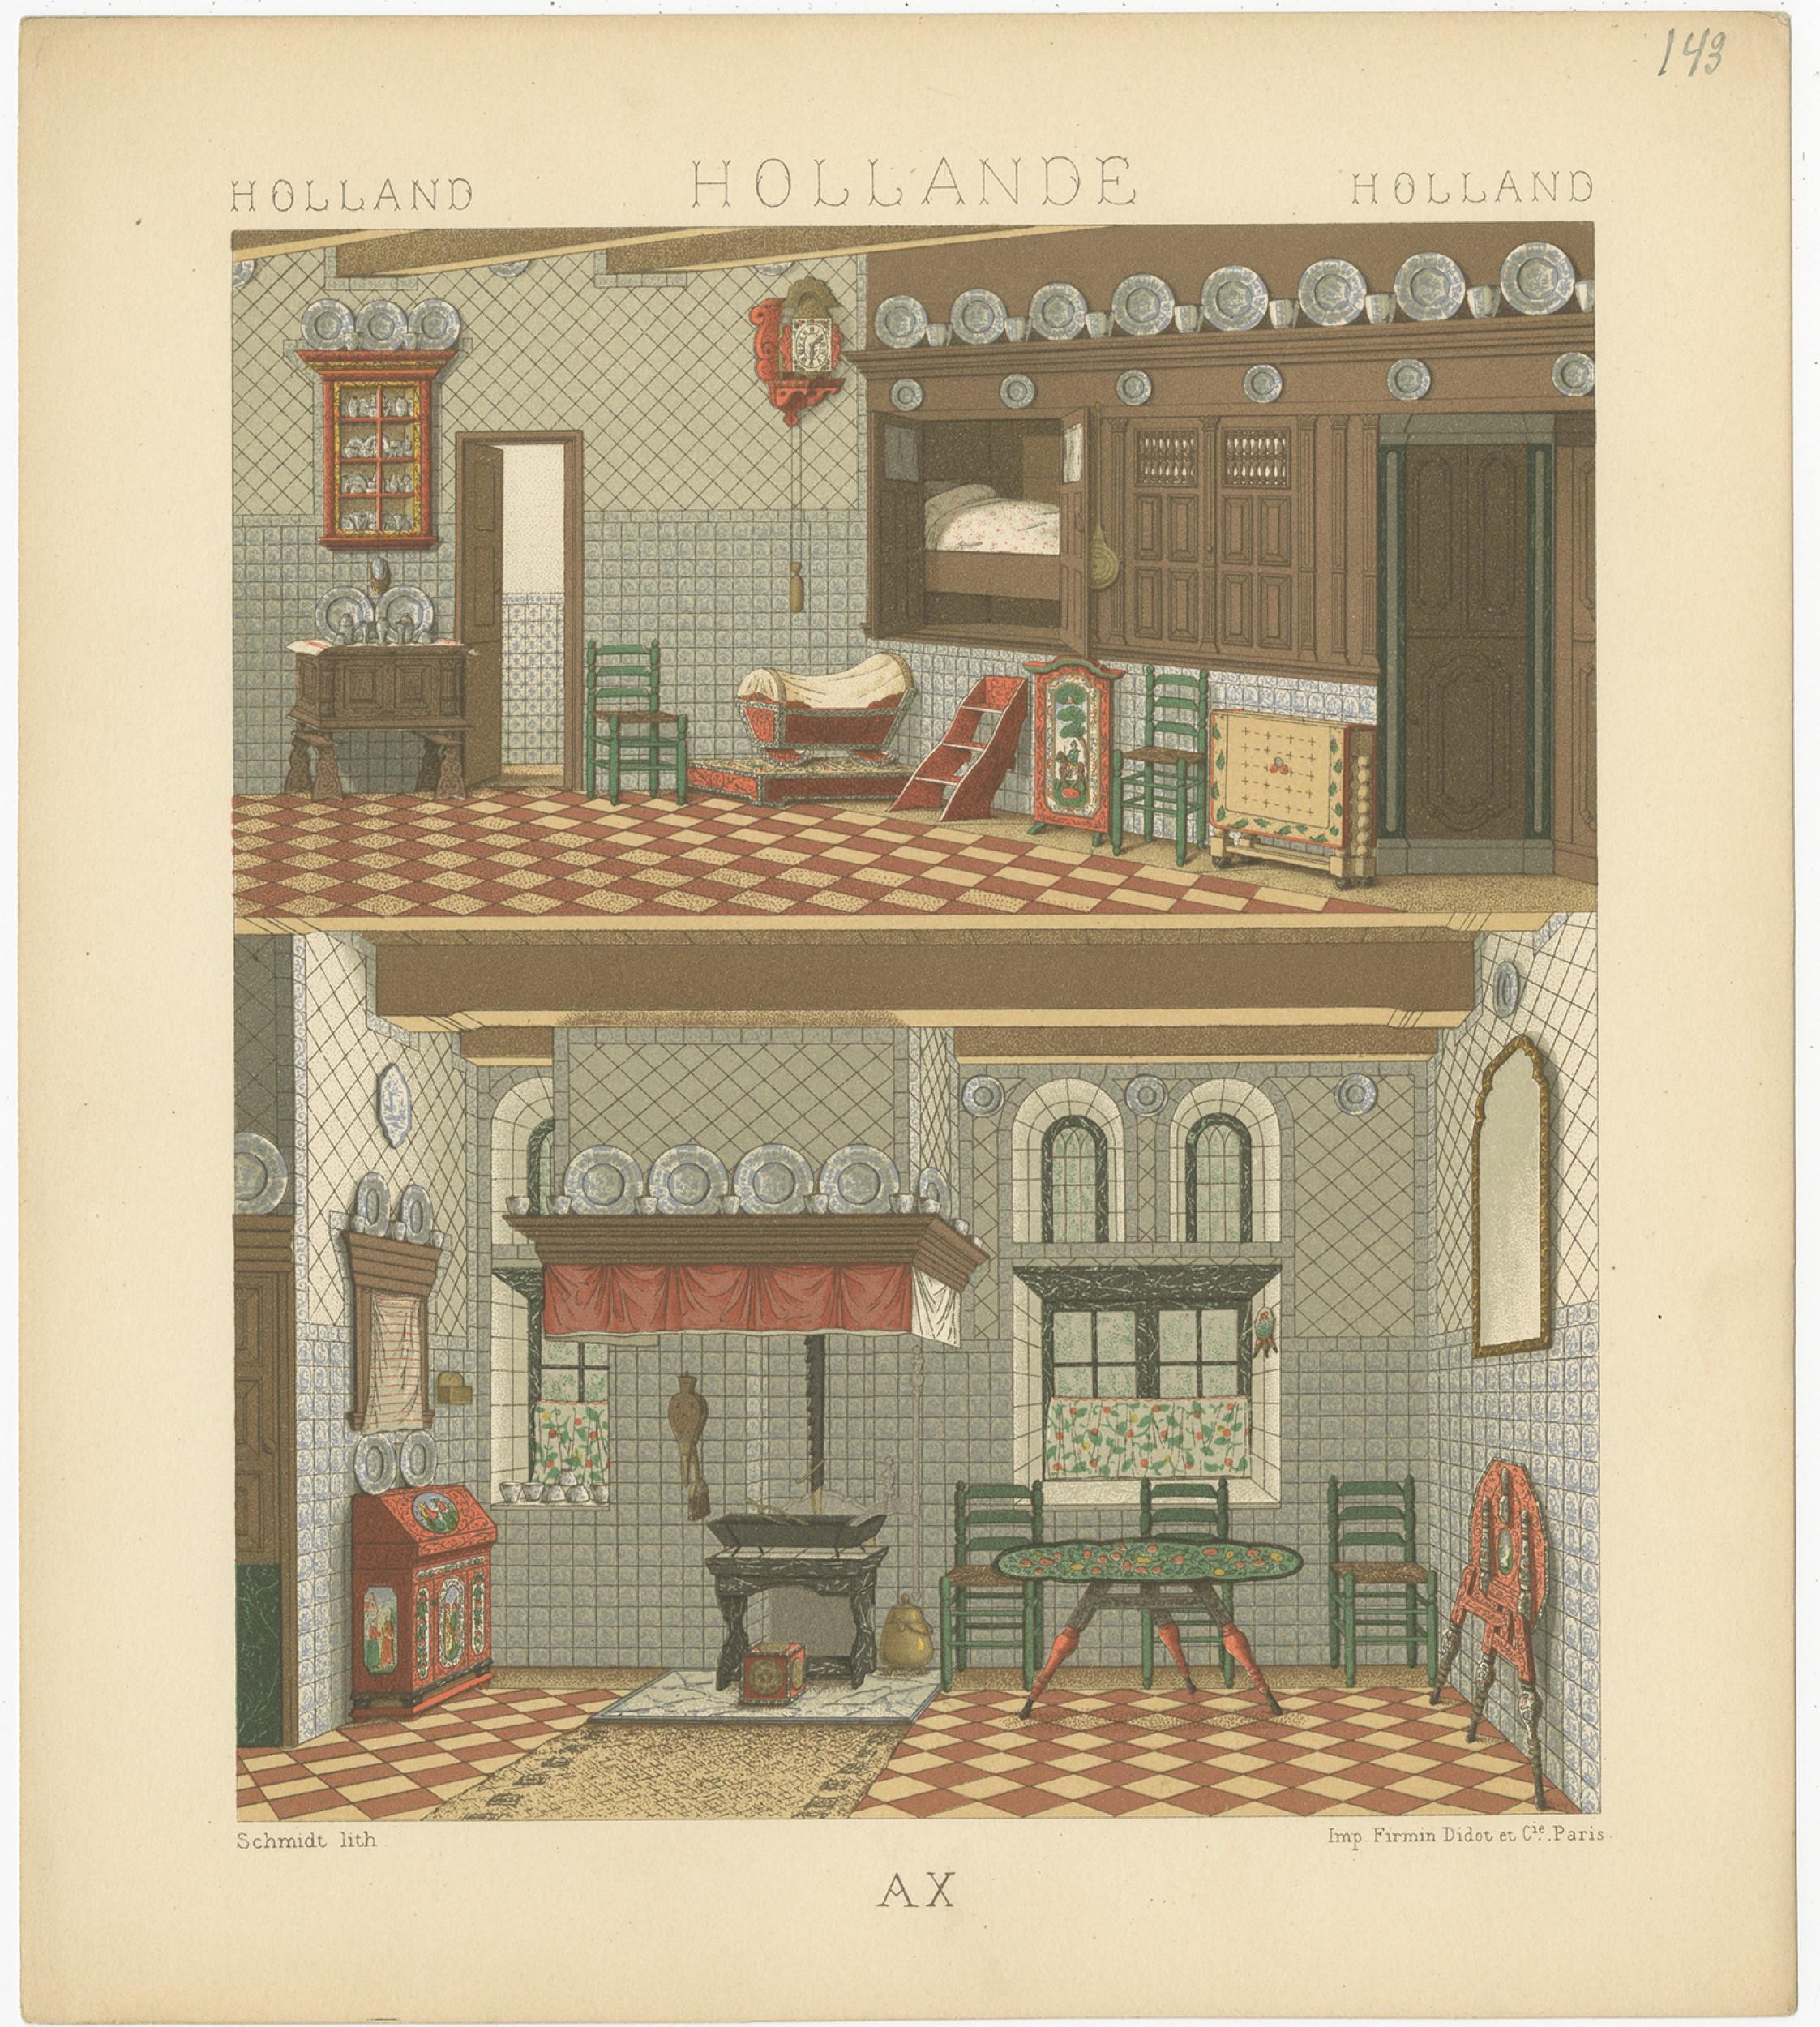 Antique print titled 'Holland - Hollande - Holland'. Chromolithograph of Holland Interior. This print originates from 'Le Costume Historique' by M.A. Racinet. Published, circa 1880.
 
  